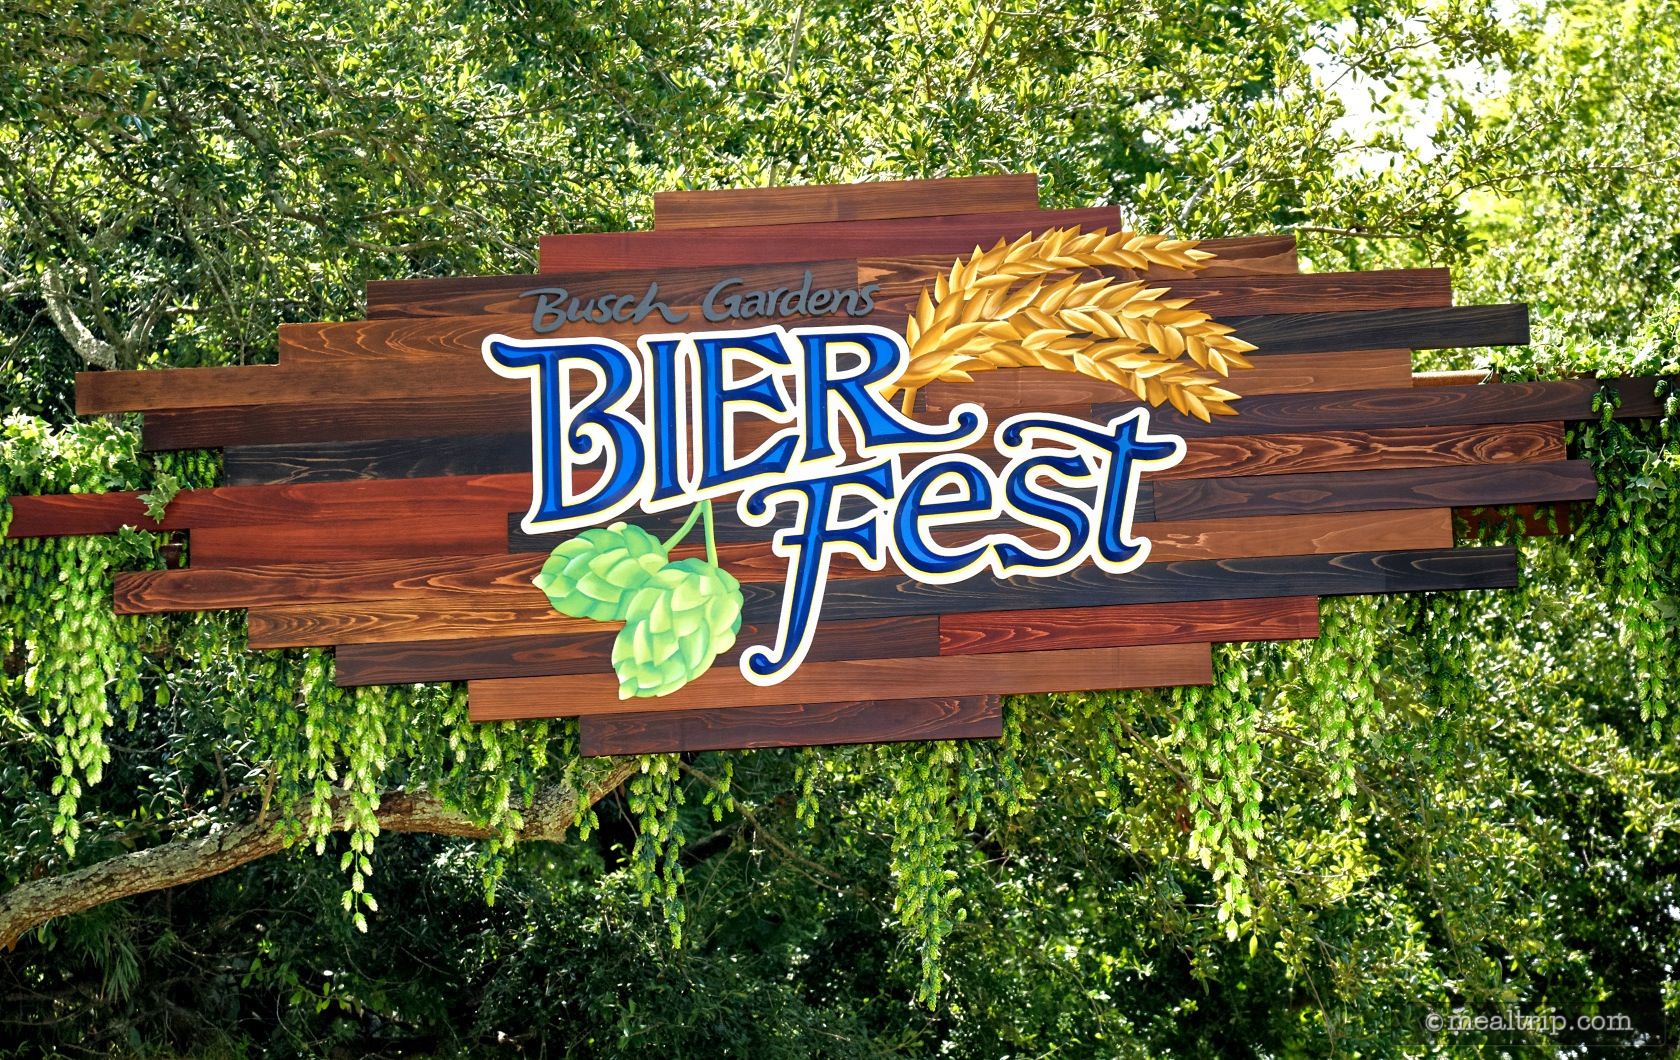 Bier Fest Menu Boards with Prices for 2018